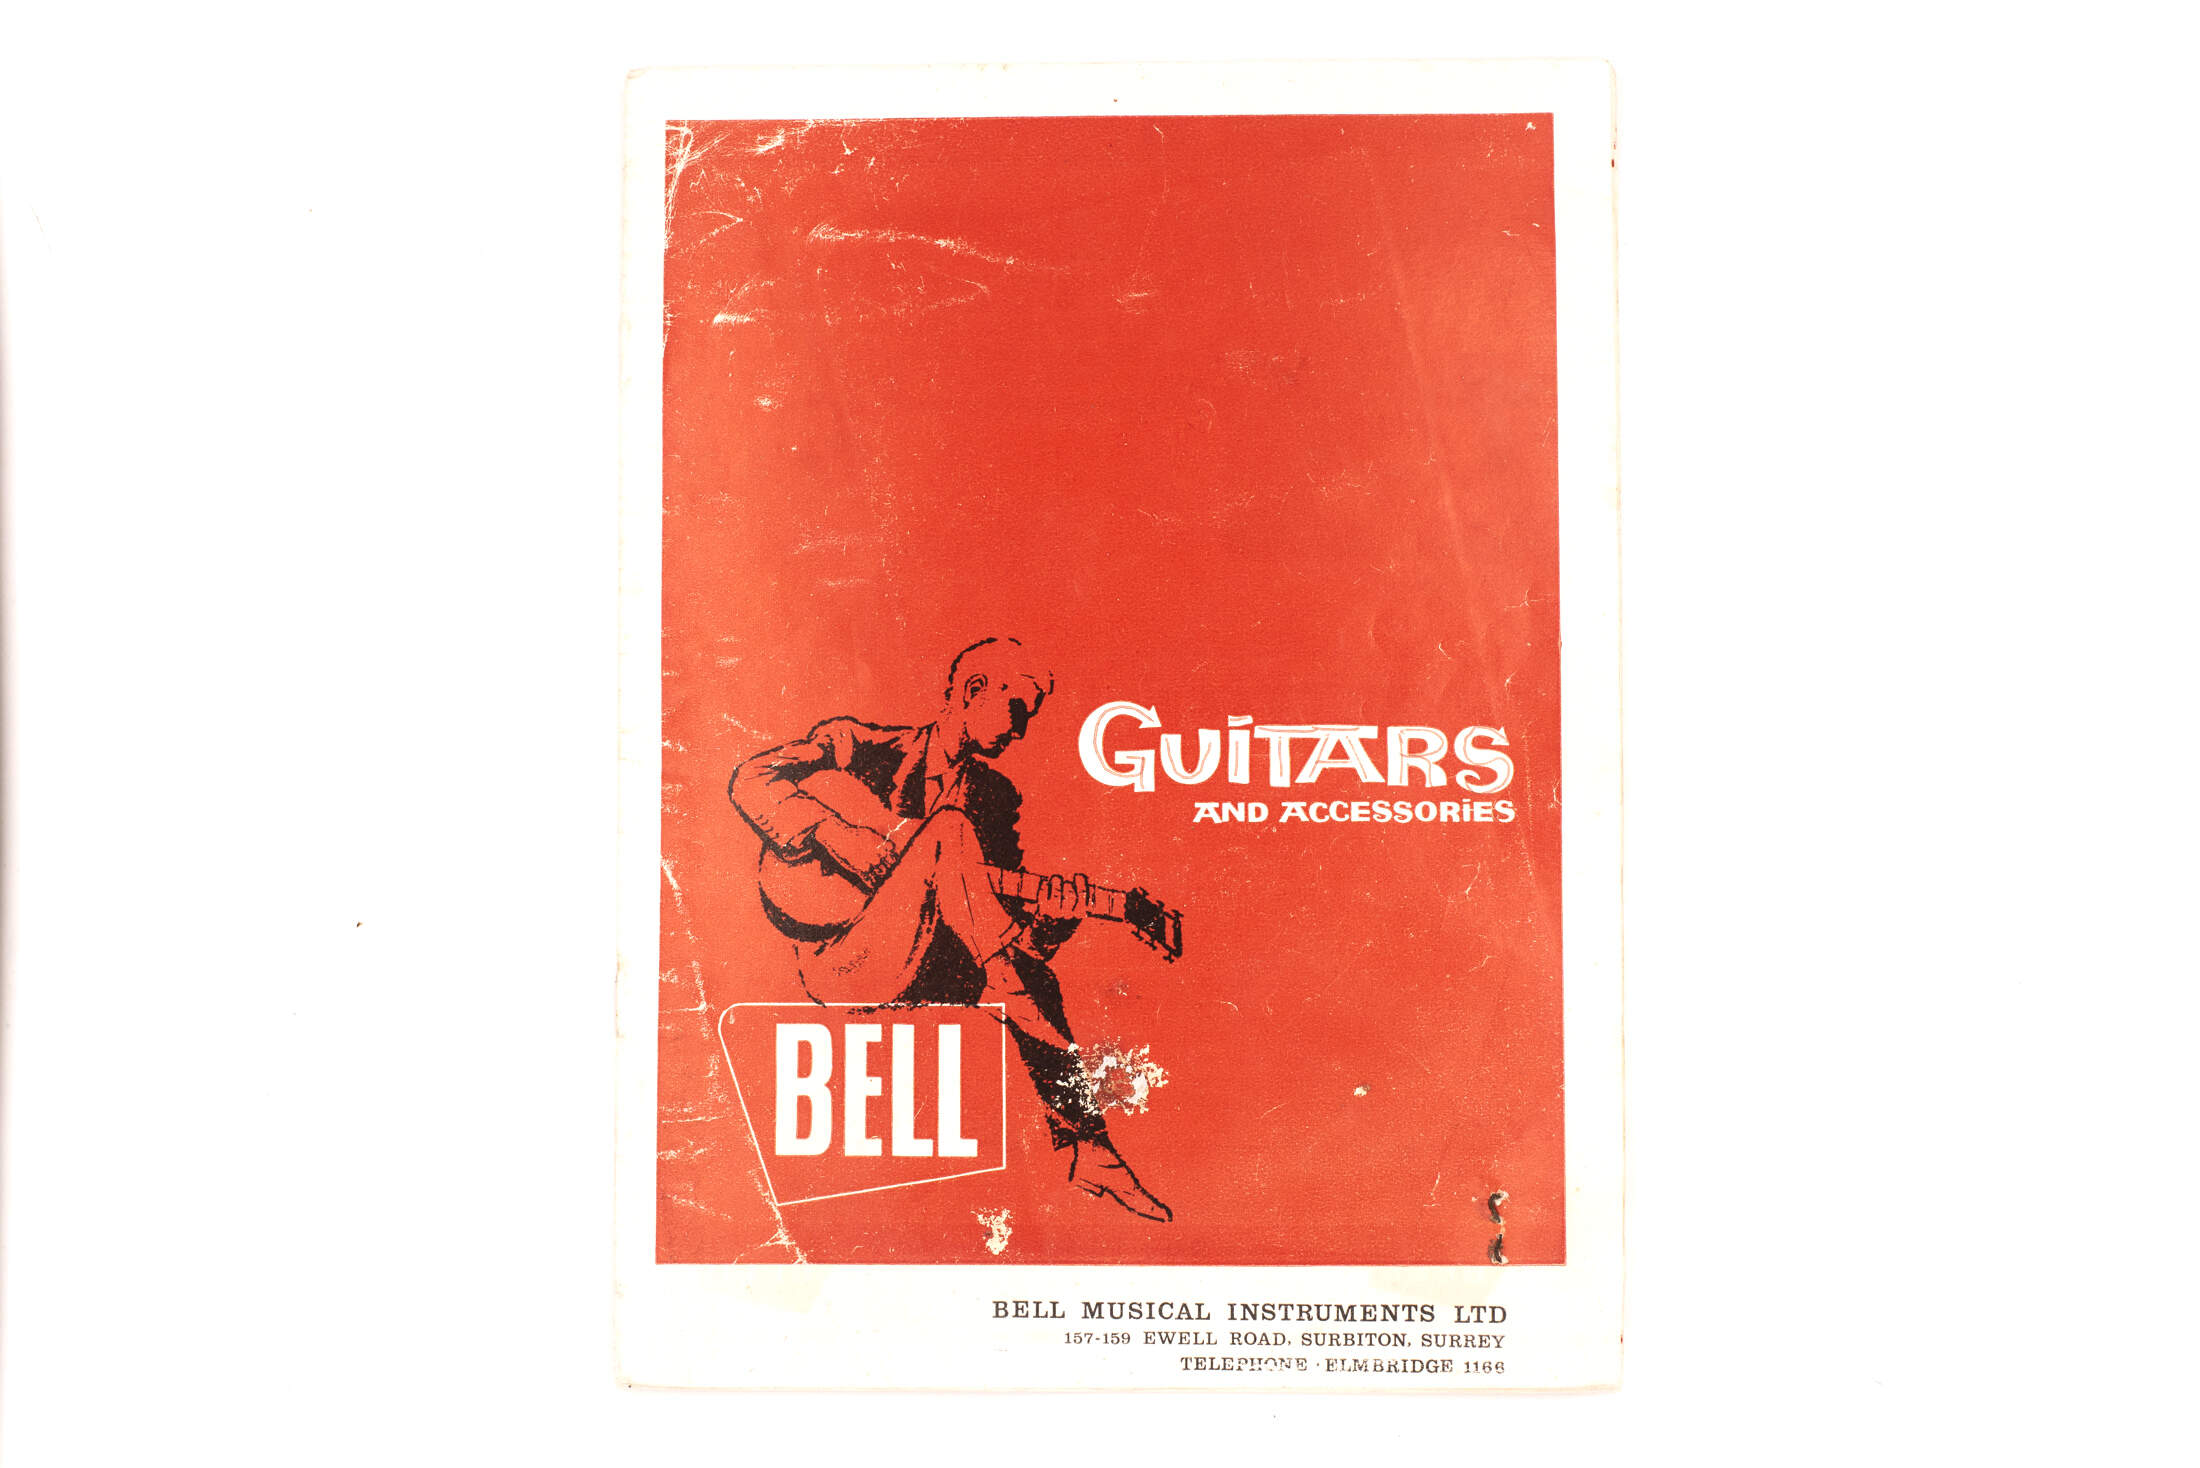 The Bell Music Catalogue is fondly remembered by most musicians of a certain age!